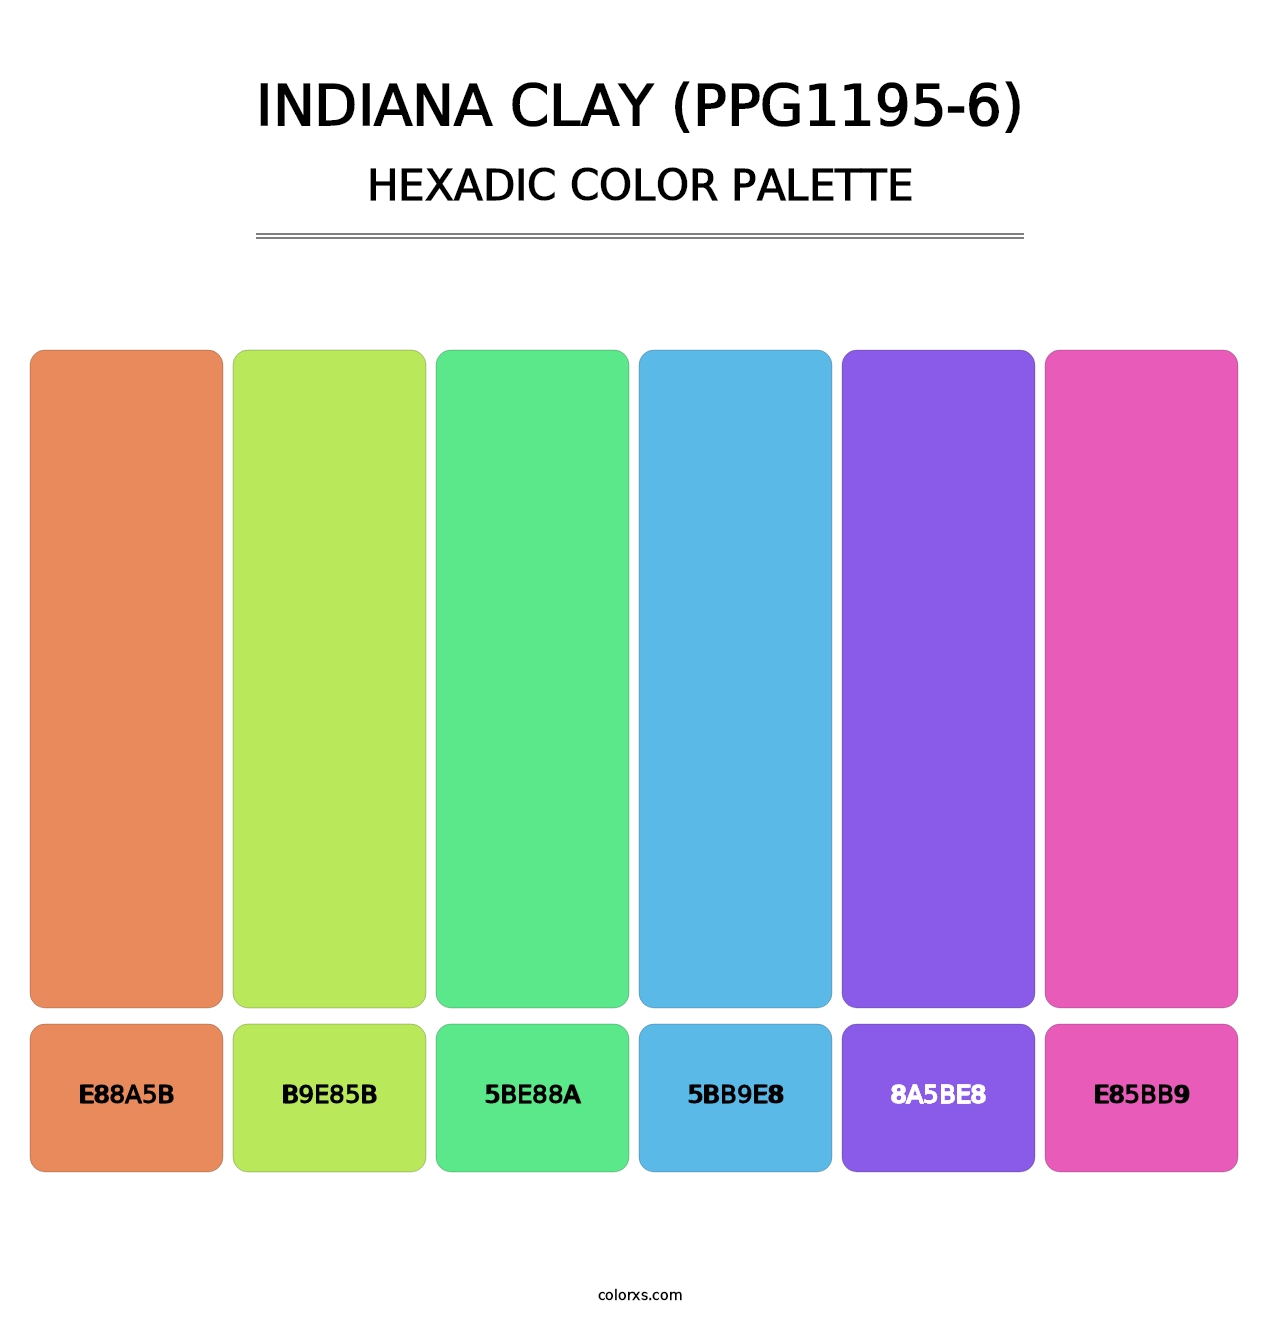 Indiana Clay (PPG1195-6) - Hexadic Color Palette